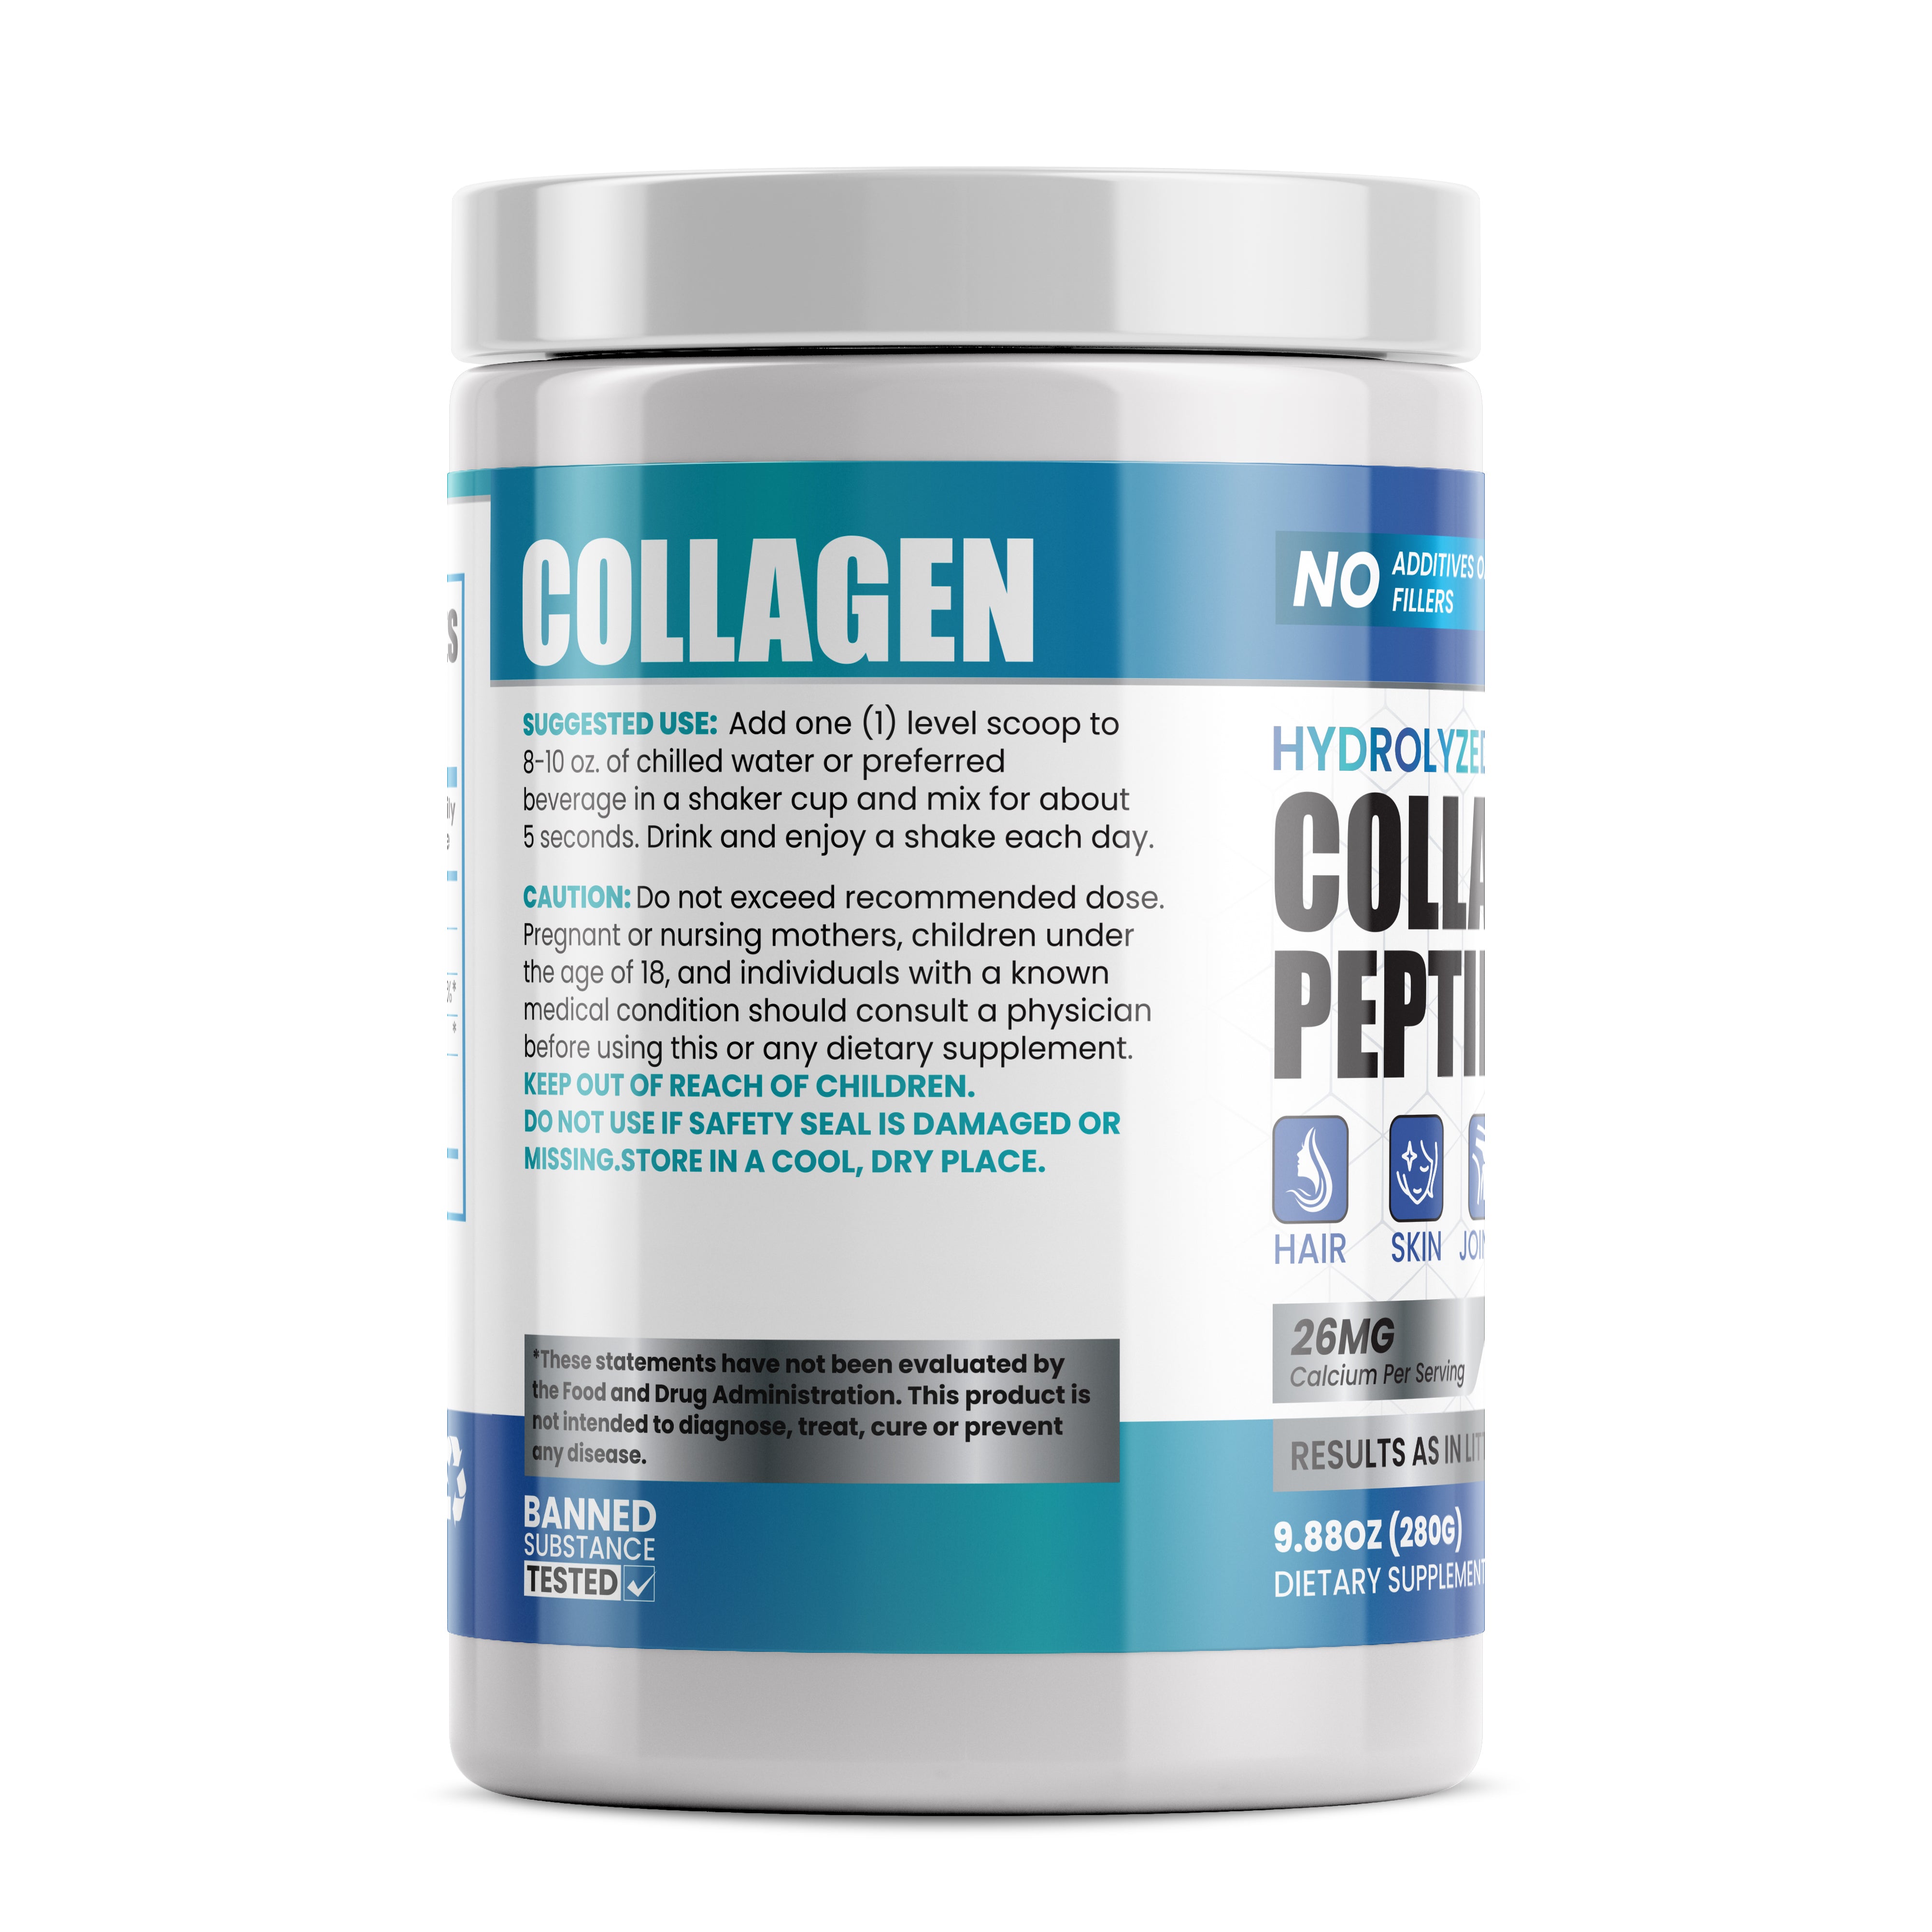 Grass-Fed Hydrolyzed Collagen Peptides (Out of stock)